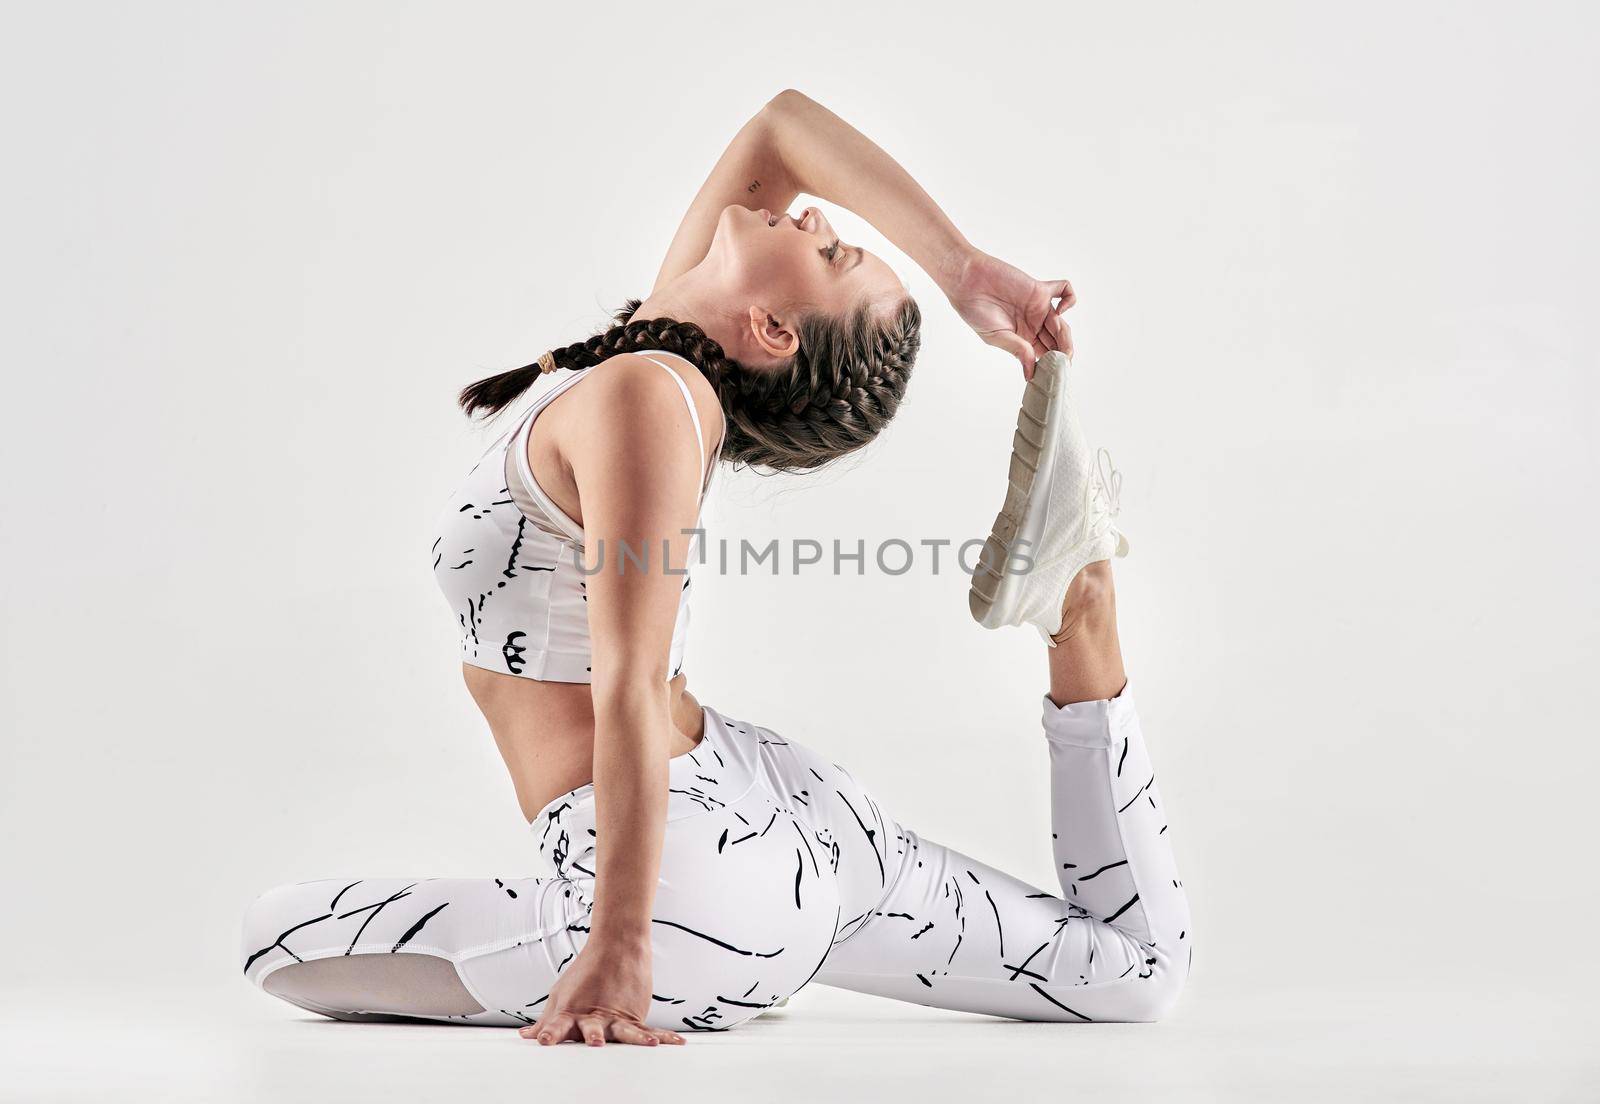 Chin up princess, or the crown slips. Studio shot of a sporty young woman exercising against a white background. by YuriArcurs